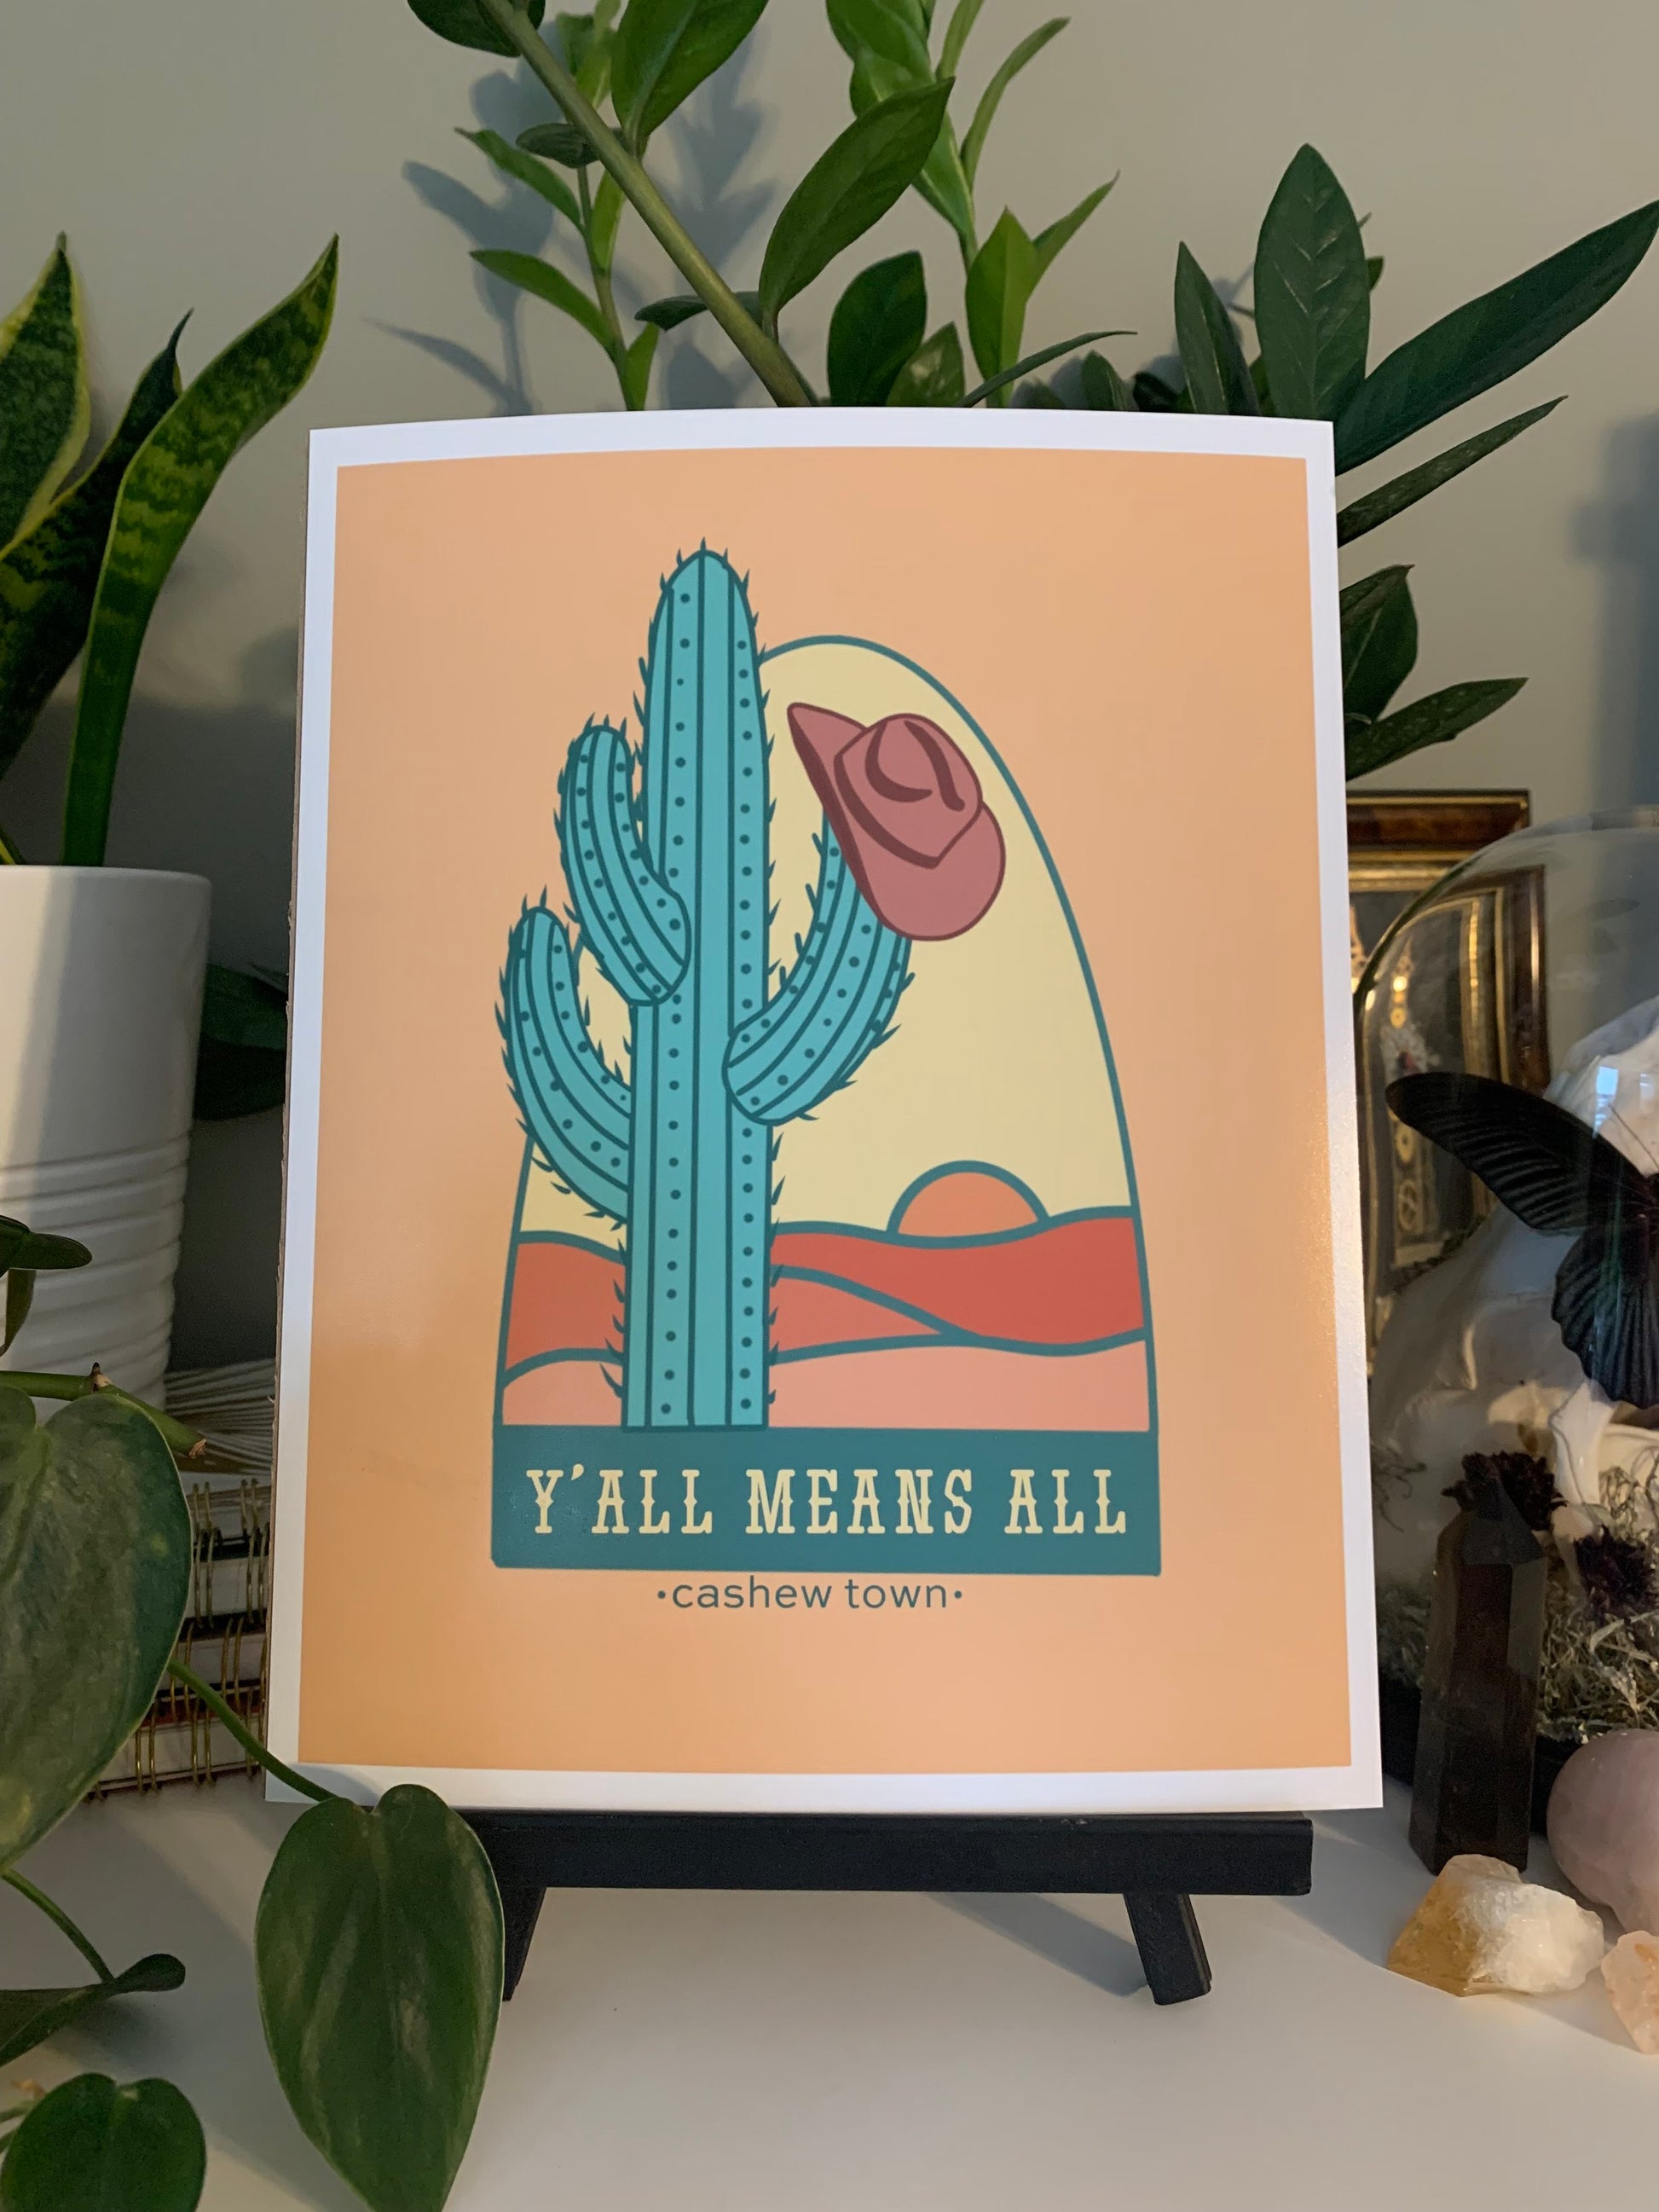 A print of the Y'all Means All design in front of house plants. The Y'all Means All Design is logo on a muted pastel orange background. The logo is a drawn green cactus with a muted maroon cowboy hat hanging off the side, in front of a very simple line color fill of a landscape with "Y'ALL MEANS ALL" underneath & "cashew town" in small letters under the design.